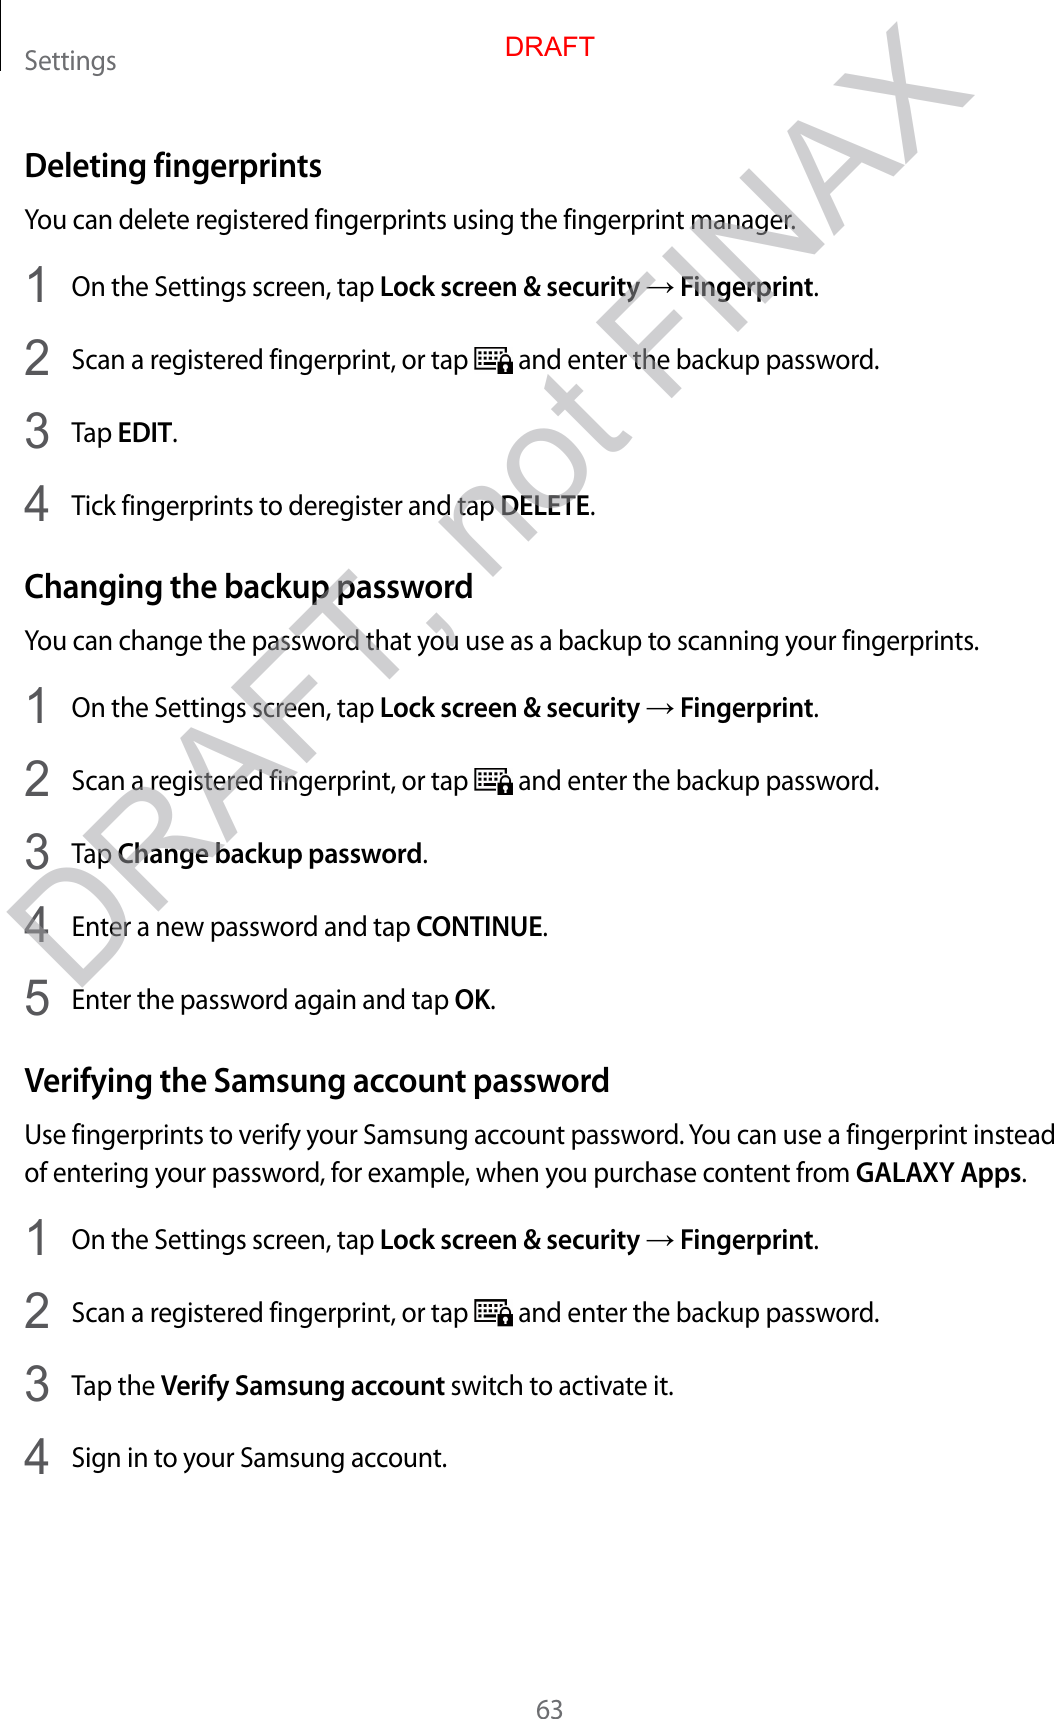 Settings63Deleting fingerprintsYou can delete registered fingerprints using the fingerprint manager.1  On the Settings screen, tap Lock screen &amp; security → Fingerprint.2  Scan a registered fingerprint, or tap   and enter the backup password.3  Tap EDIT.4  Tick fingerprints to deregister and tap DELETE.Changing the backup passwordYou can change the password that you use as a backup to scanning your fingerprints.1  On the Settings screen, tap Lock screen &amp; security → Fingerprint.2  Scan a registered fingerprint, or tap   and enter the backup password.3  Tap Change backup password.4  Enter a new password and tap CONTINUE.5  Enter the password again and tap OK.Verifying the Samsung account passwordUse fingerprints to verify your Samsung account password. You can use a fingerprint instead of entering your password, for example, when you purchase content from GALAXY Apps.1  On the Settings screen, tap Lock screen &amp; security → Fingerprint.2  Scan a registered fingerprint, or tap   and enter the backup password.3  Tap the Verify Samsung account switch to activate it.4  Sign in to your Samsung account.DRAFTDRAFT, not FINAX